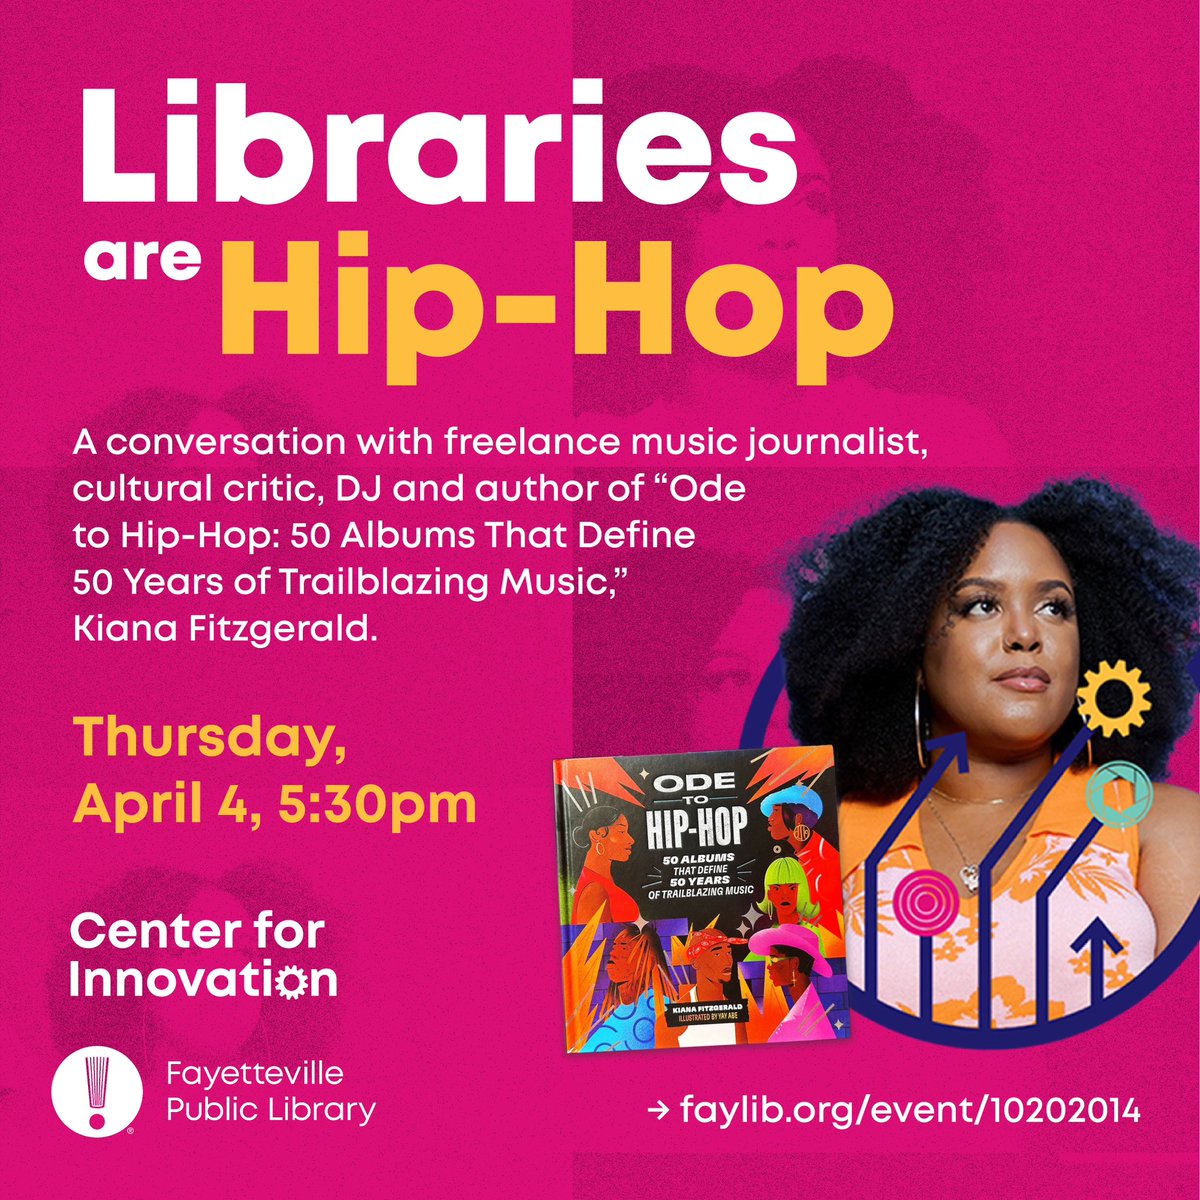 I’ll be at Fayetteville Public Library in Arkansas this Thursday 4/4! I’ve been invited to talk about my favorite thing in the world: hip-hop. That includes my book, which I can’t wait to continue celebrating. 🥰 Details: faylib.org/event/10202014